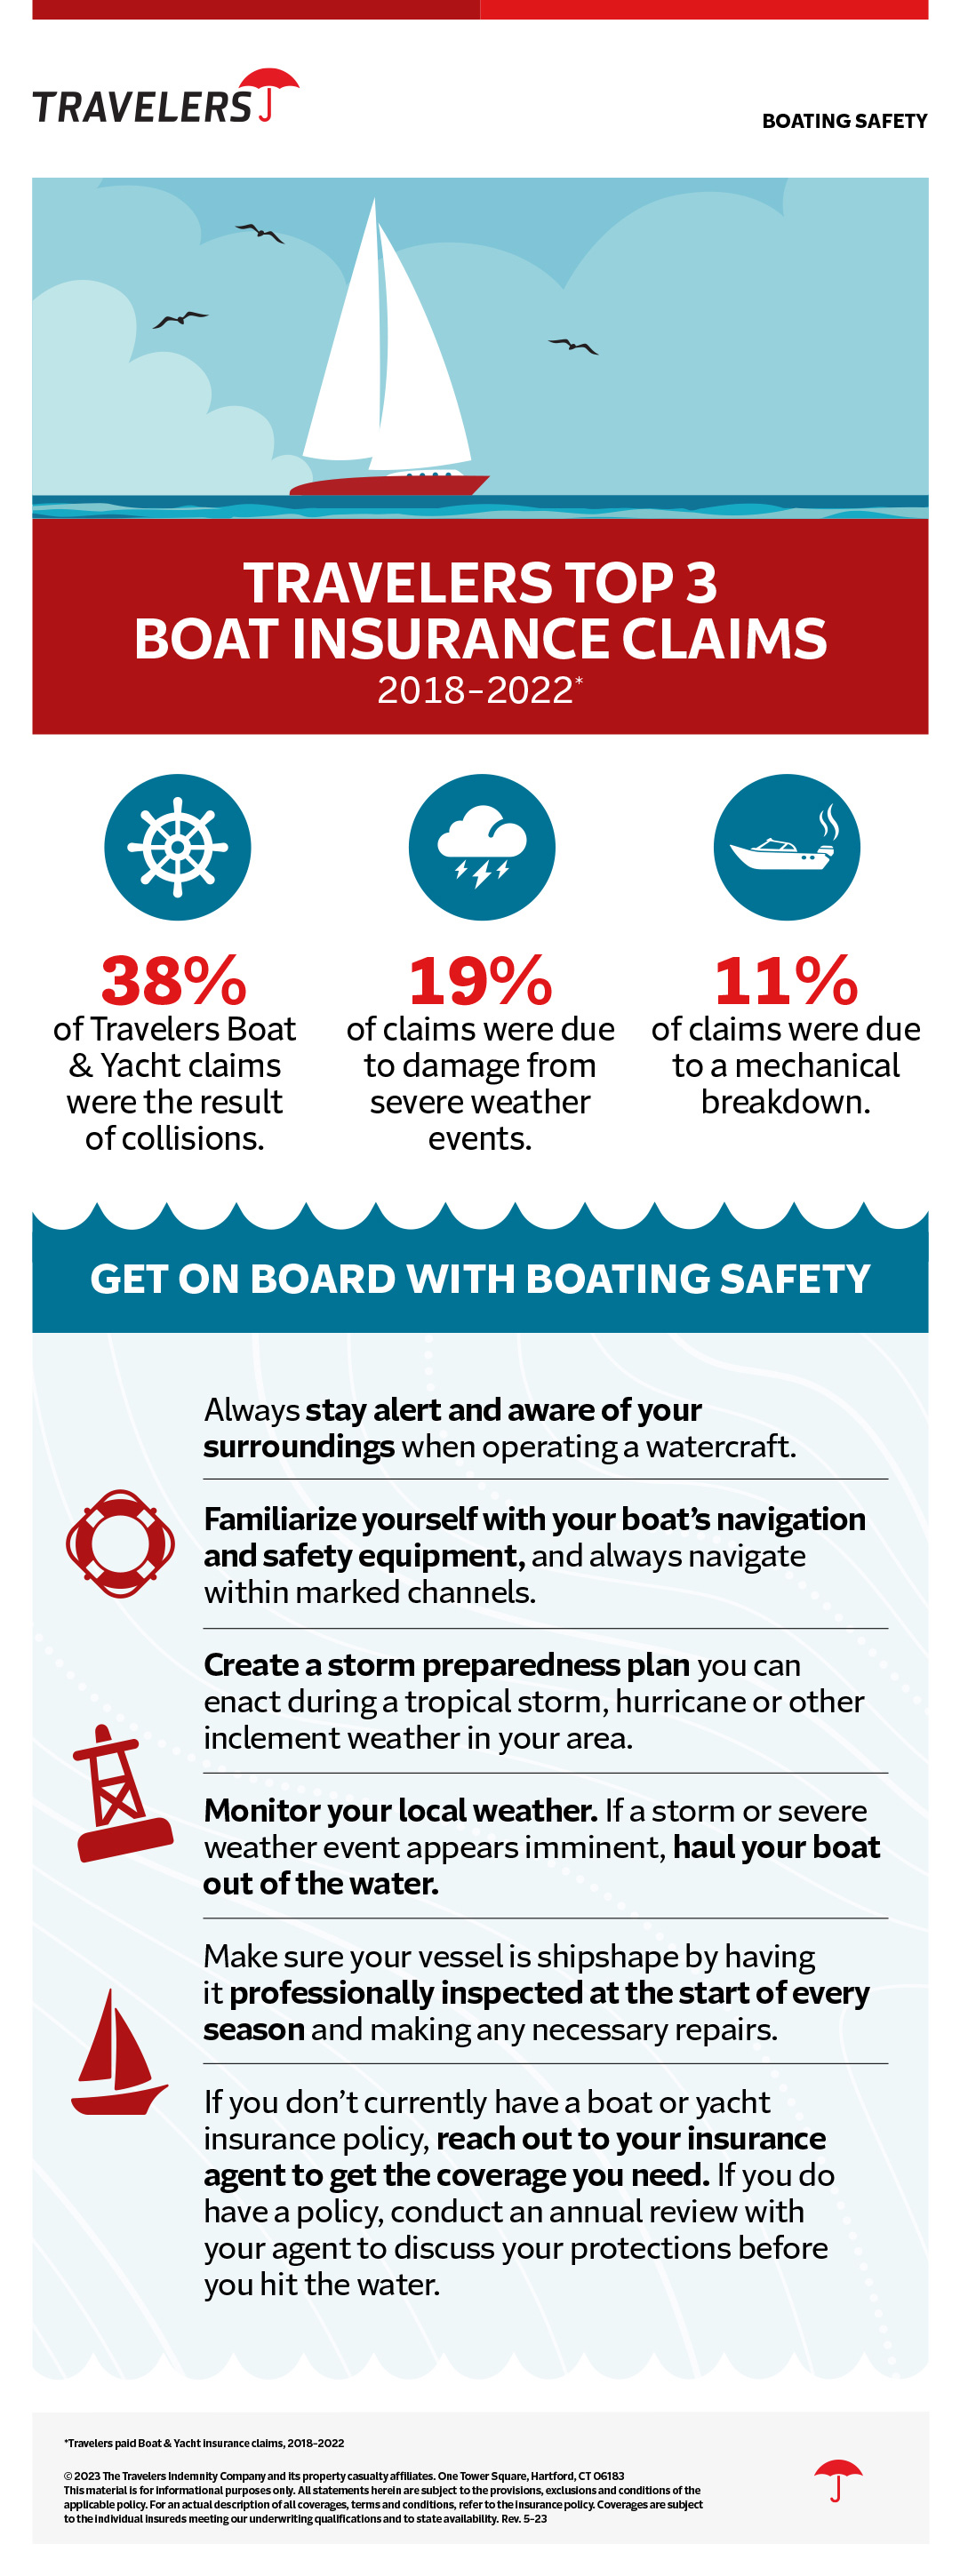 Travelers Top 3 Boat Insurance Claims, see details below.